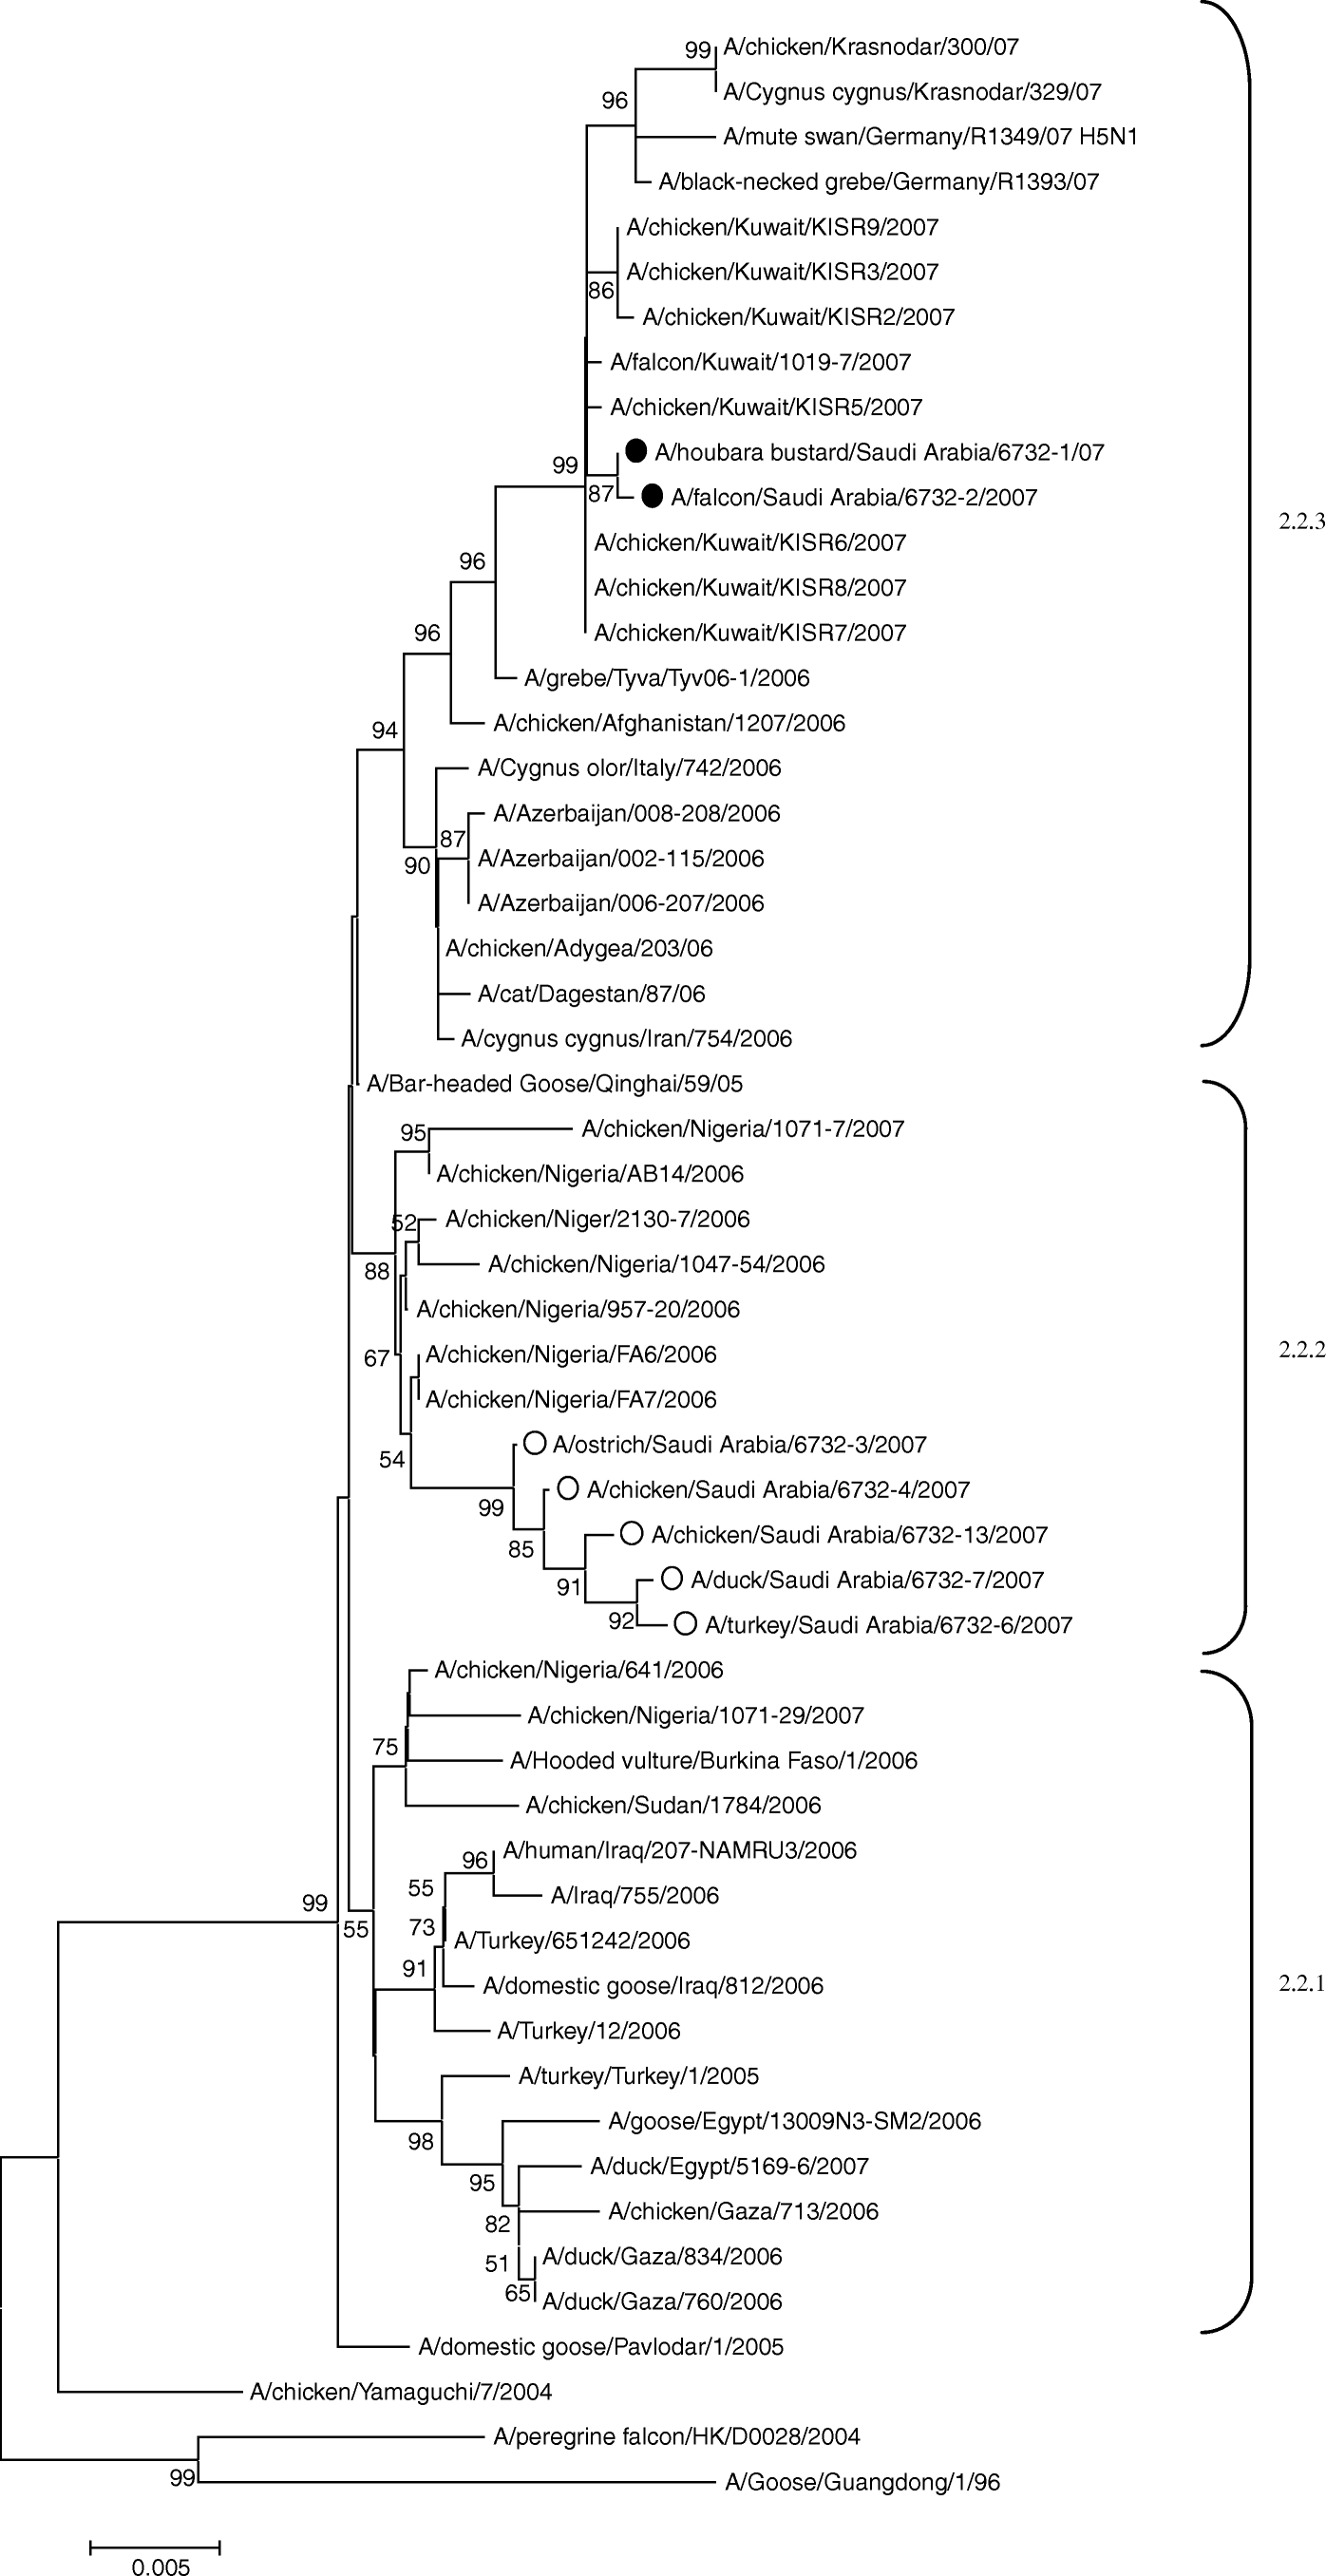 Figure 1.  Unrooted phylogenetic tree for representative HA nucleotide sequences of clade 2.2 constructed by the neighbour-joining method. Black circles, sequences generated from the viruses described in this study. Selected A/H5N1 viral sequences are included for comparison. White circles, sequences generated from viruses isolated in poultry in the KSA. Bootstrap values >50% are shown at the nodes. Genetic sublineages included in lineage 2.2 are indicated on the right-hand side.